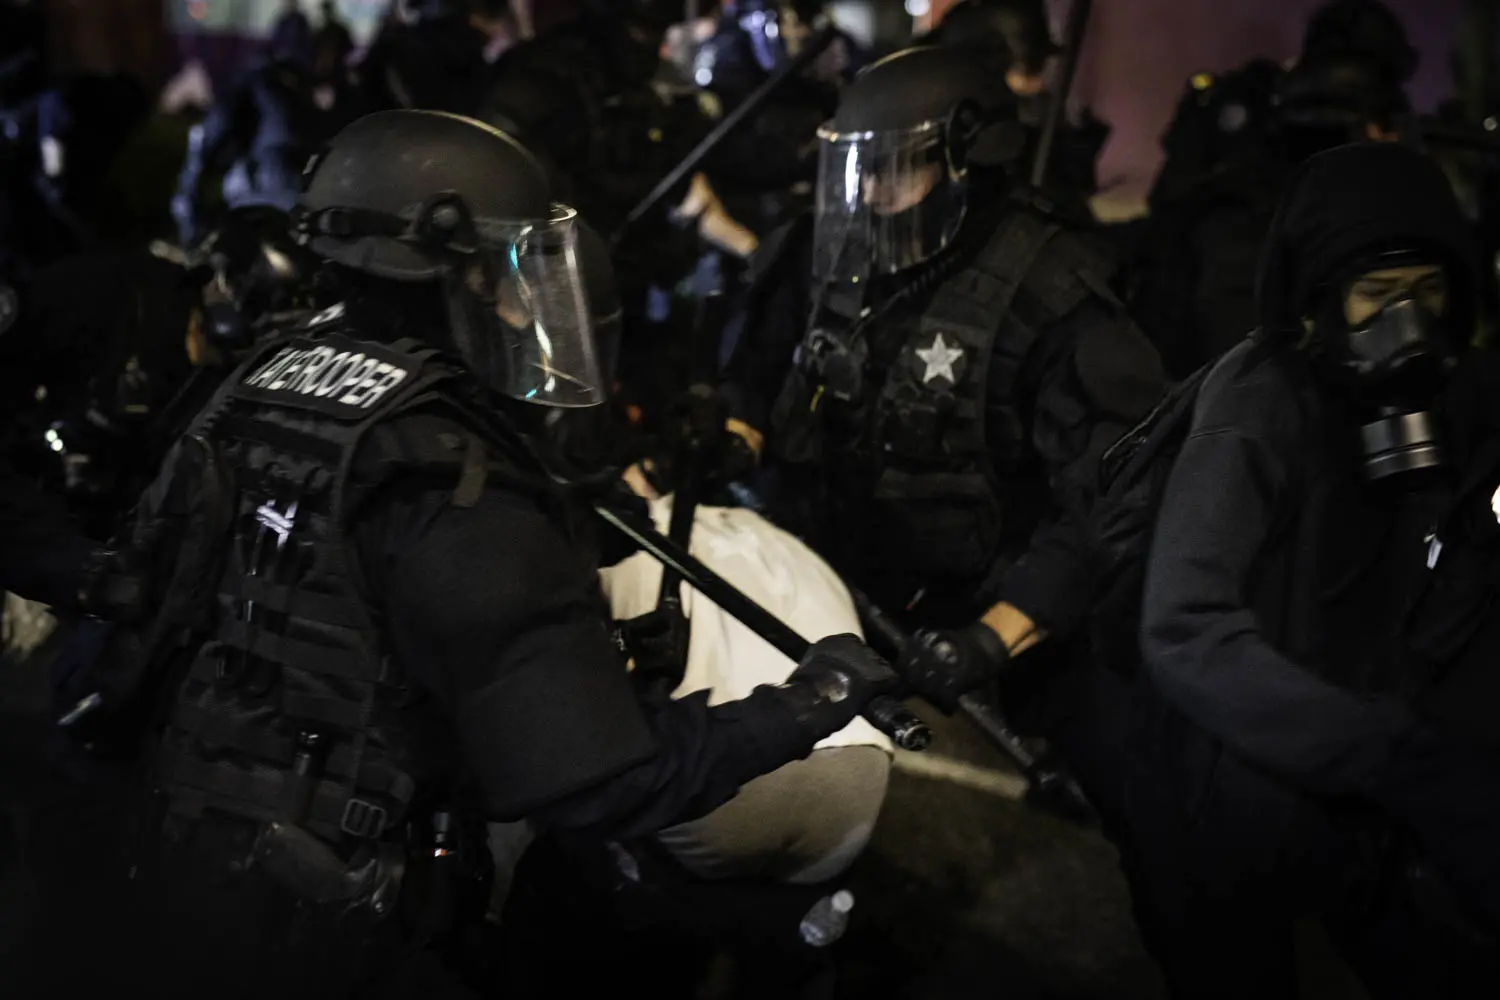  Oregon State Troopers use their clubs on a group of protesters in Portland, Oregon. 